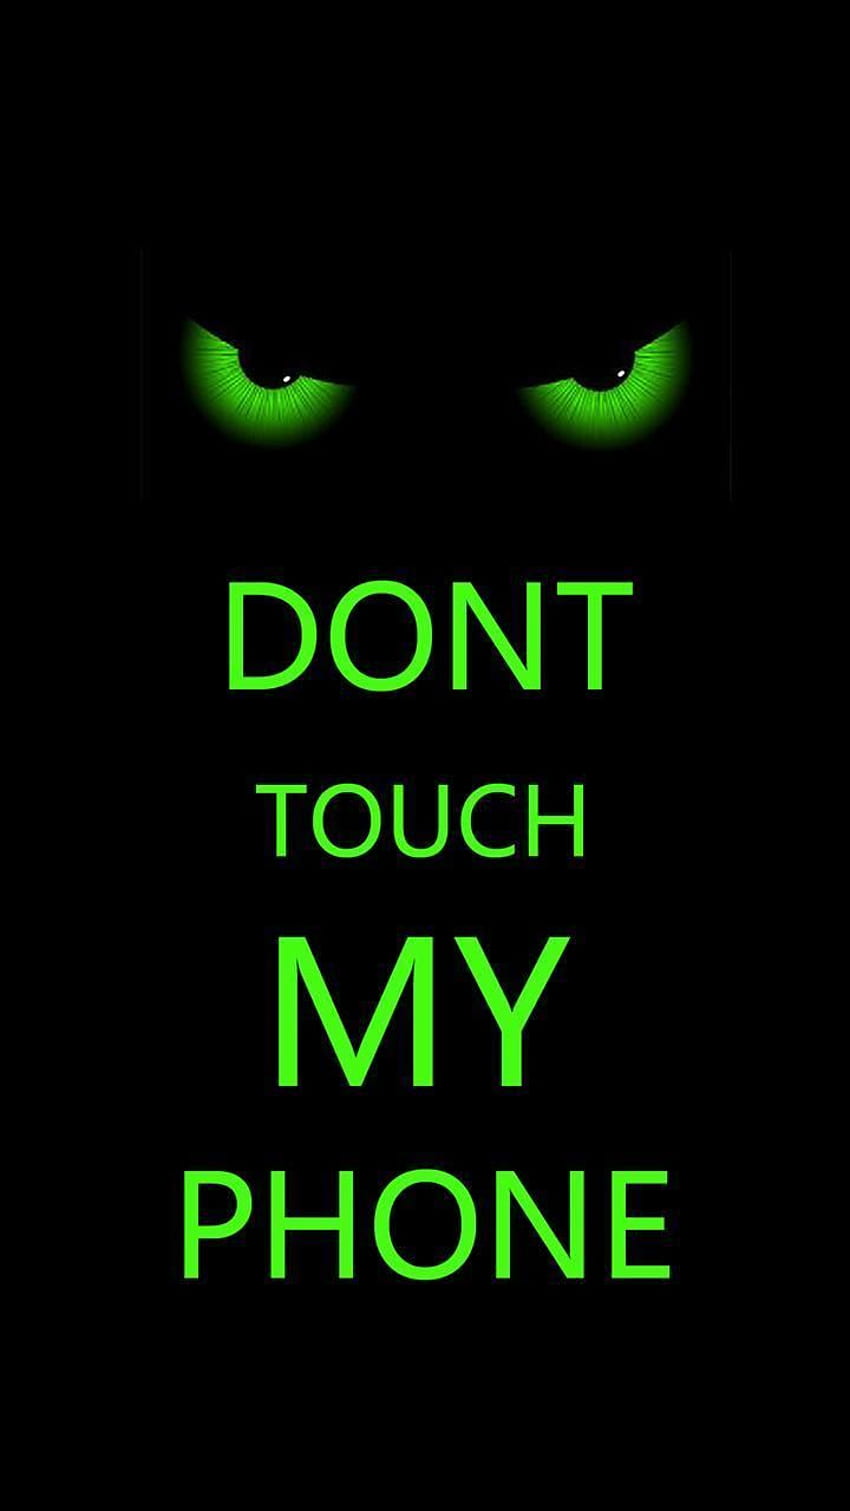 Don't Touch My Phone Green Angry Eye Looking Phone in 2021. Don't touch my phone , phone , Dont touch me HD電話の壁紙